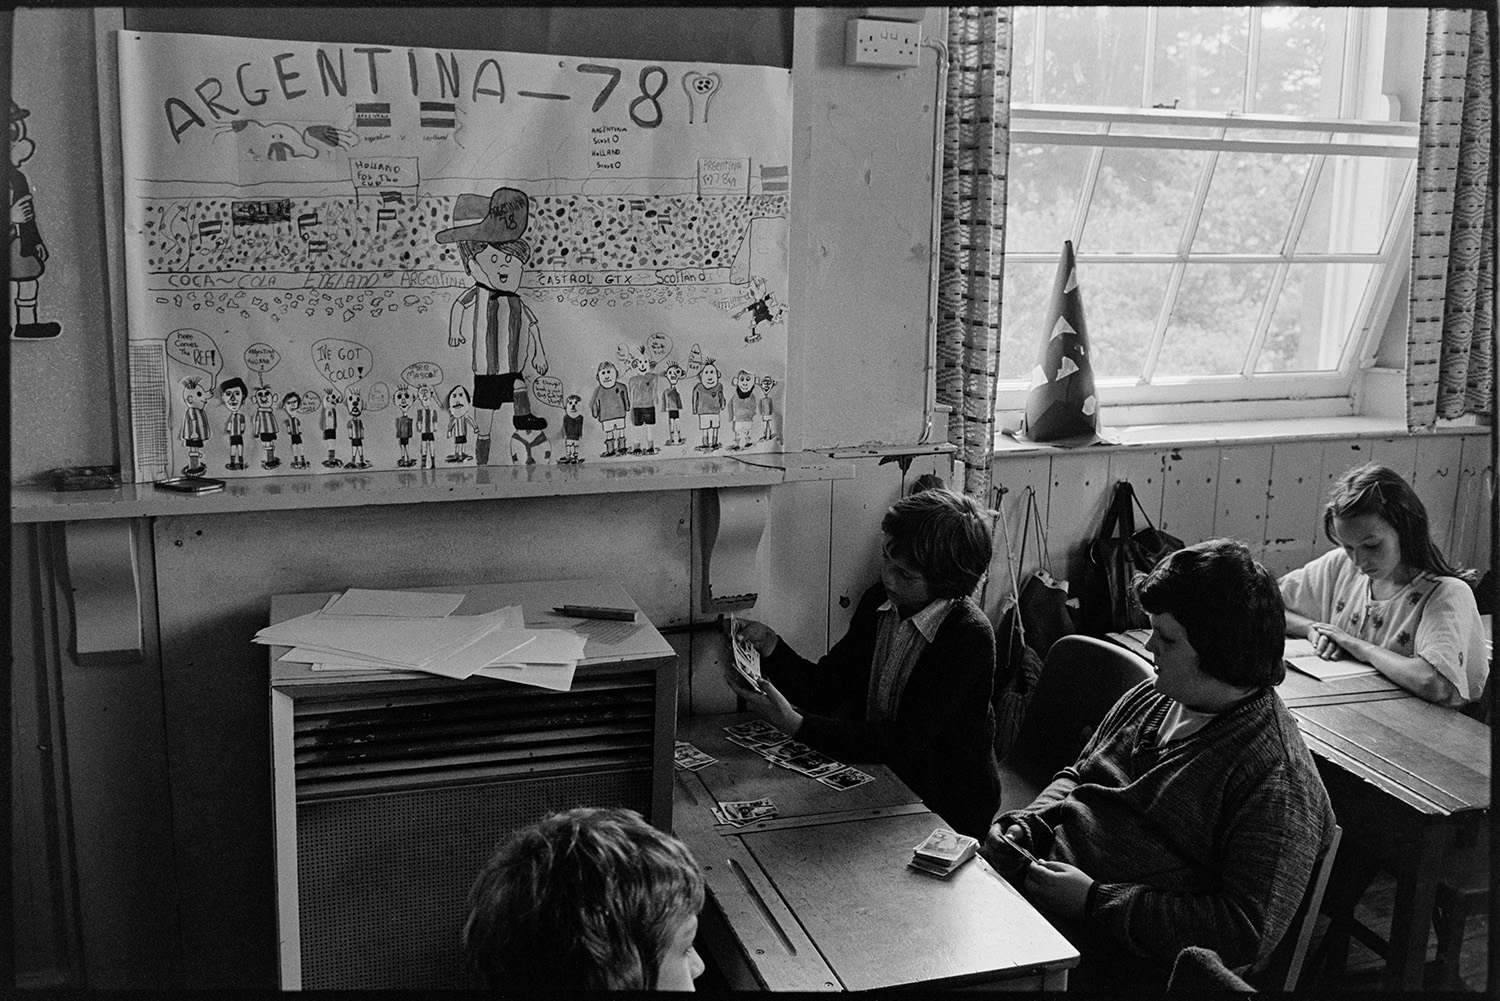 Children in class, arranging flowers. 
[Children in a classroom at Blue Coats School, Torrington. Two of them are looking at cards and a girl in the background is reading. A poster on the wall shows a child's drawing of the FIFA World Cup in Argentina in 1978.]